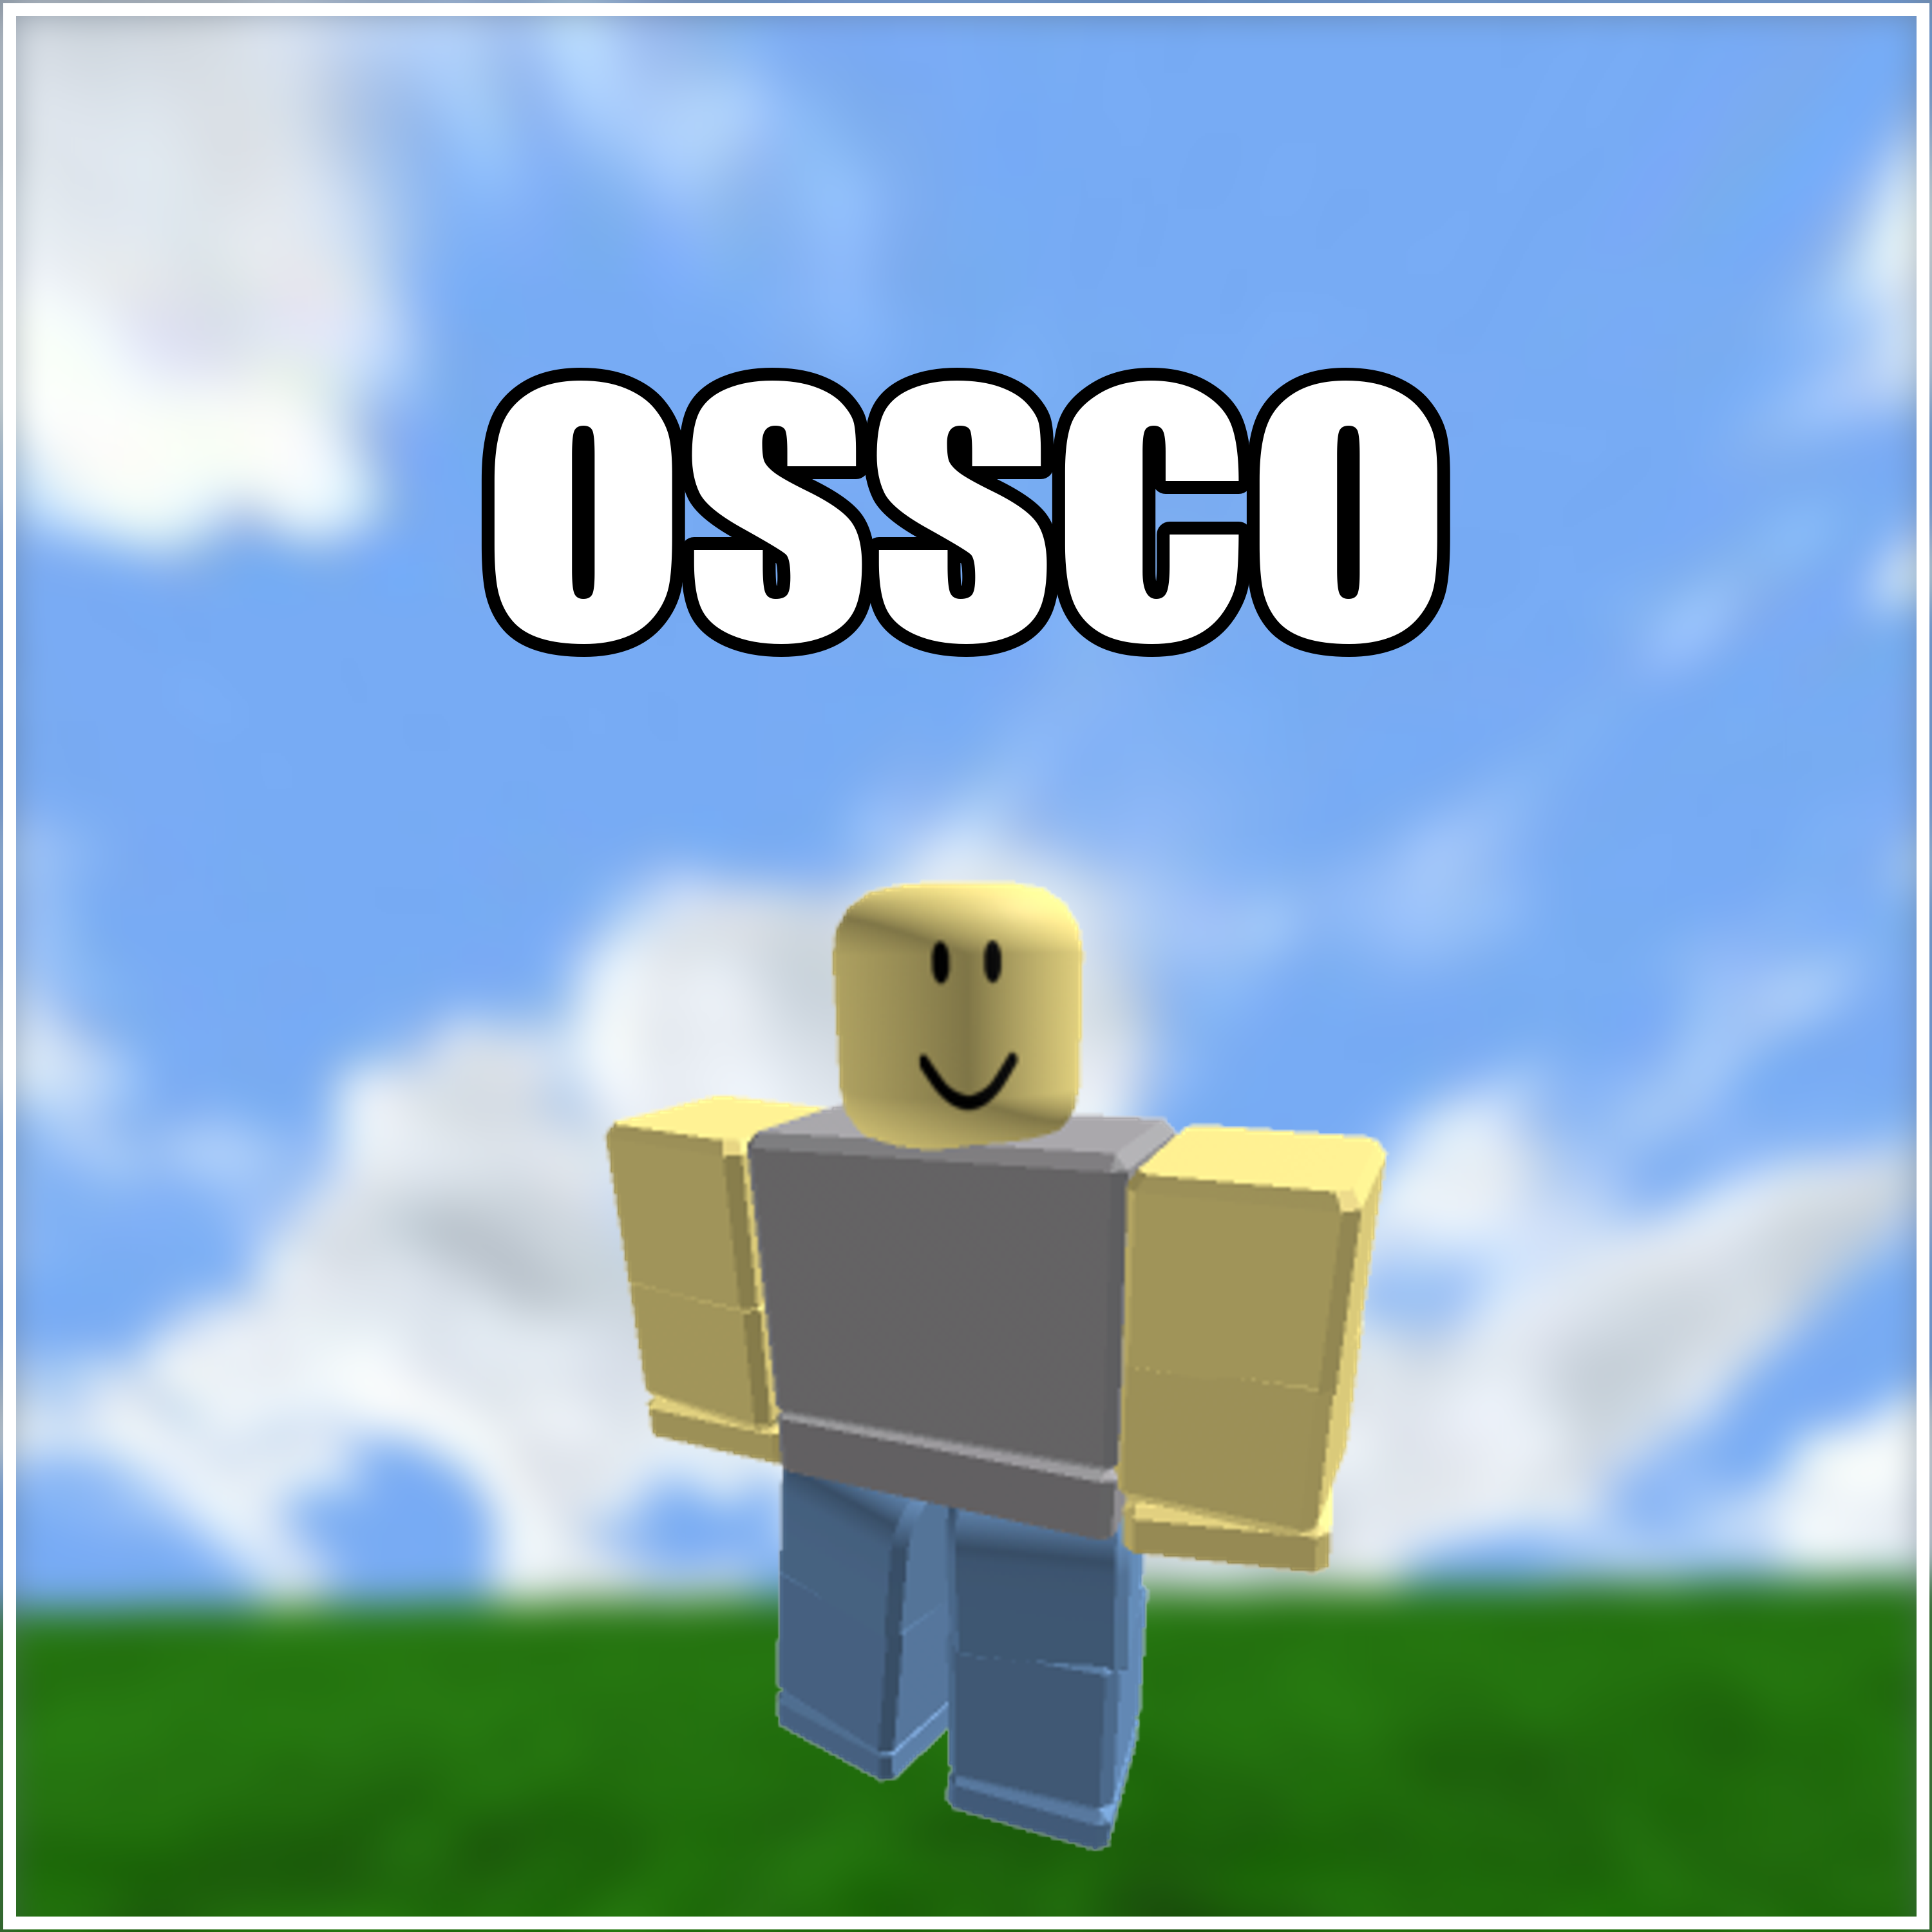 robruh RARE username "ossco" ROBLOX account guaranteed to be unverified!